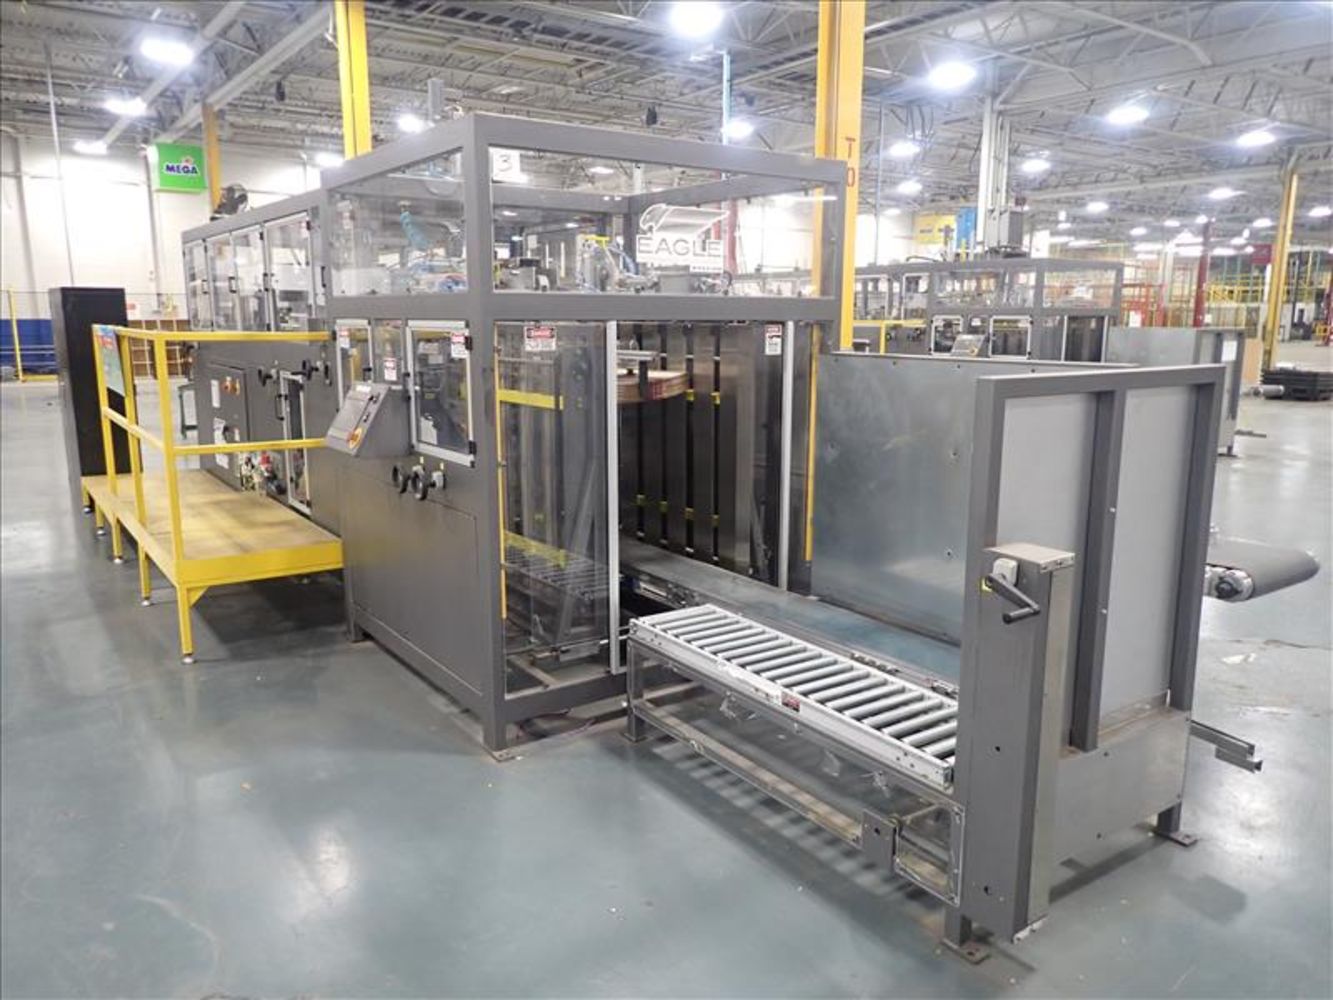 PACKAGING EQUIPMENT FROM MAJOR TOY MANUFACTURER